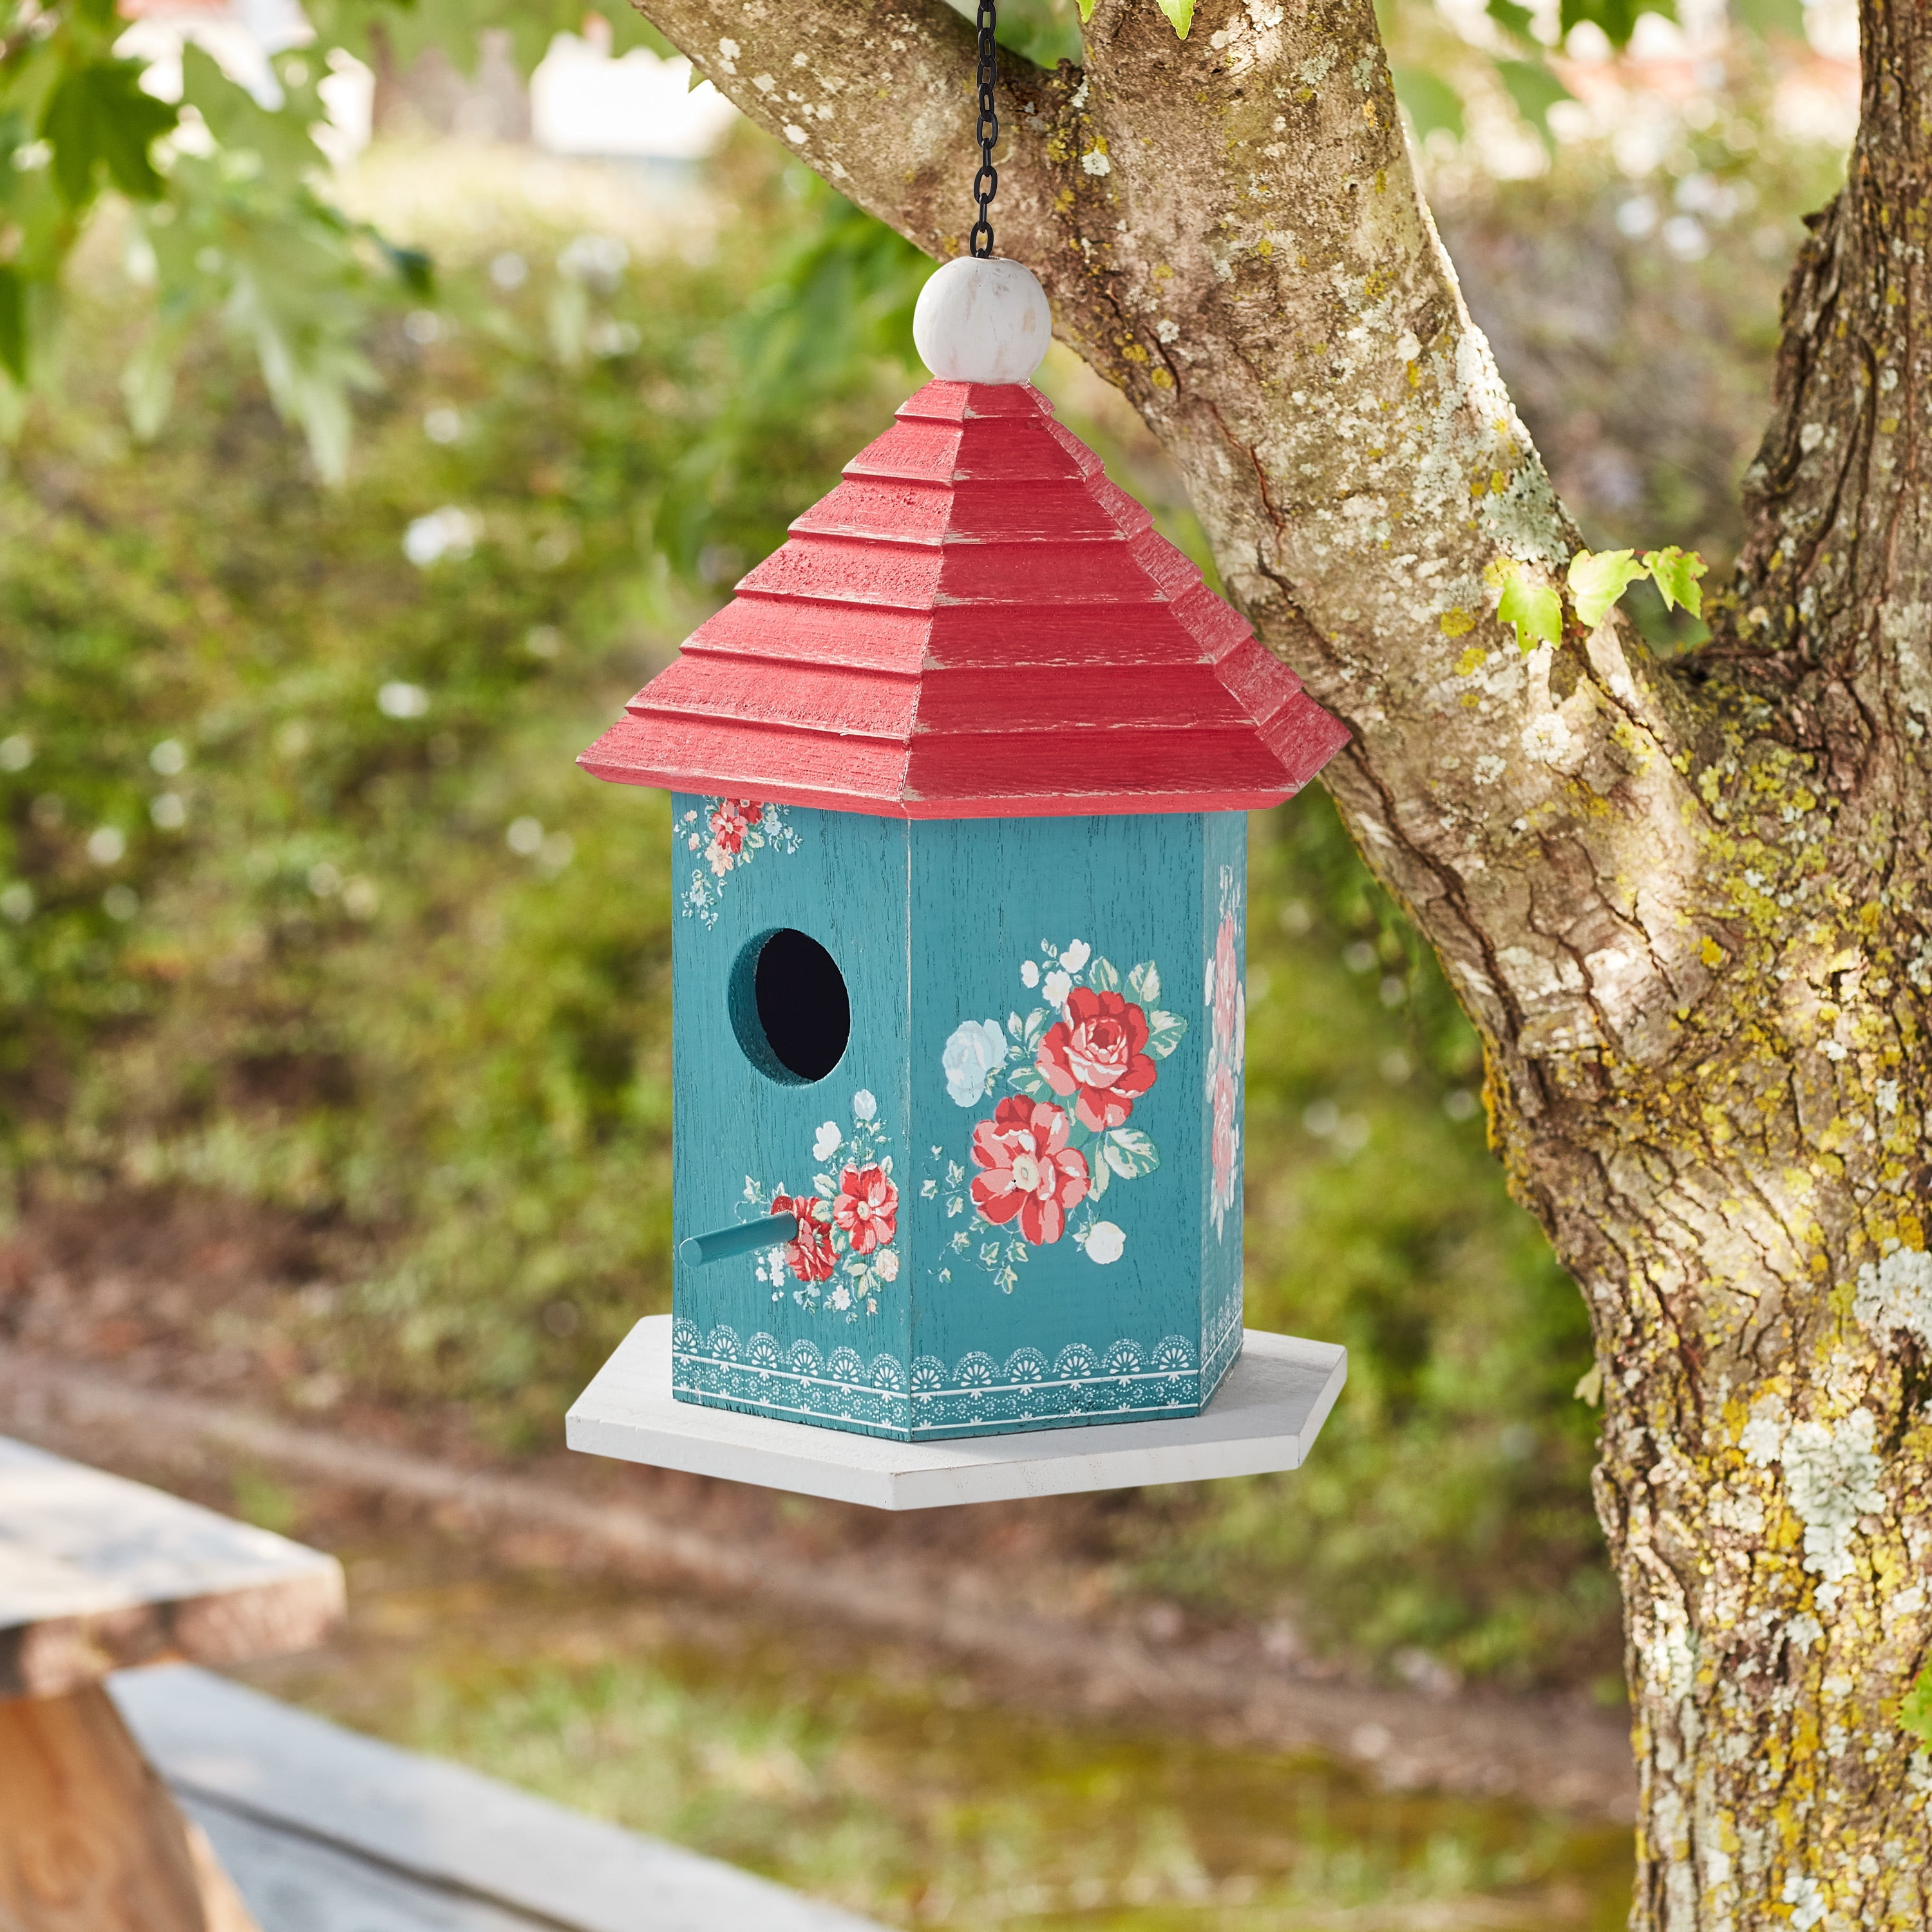 RUSTIC WOODEN  BIRD HOUSE WITH LICENSE PLATE ROOF SUPER STURDY GARDEN AND PORCH  